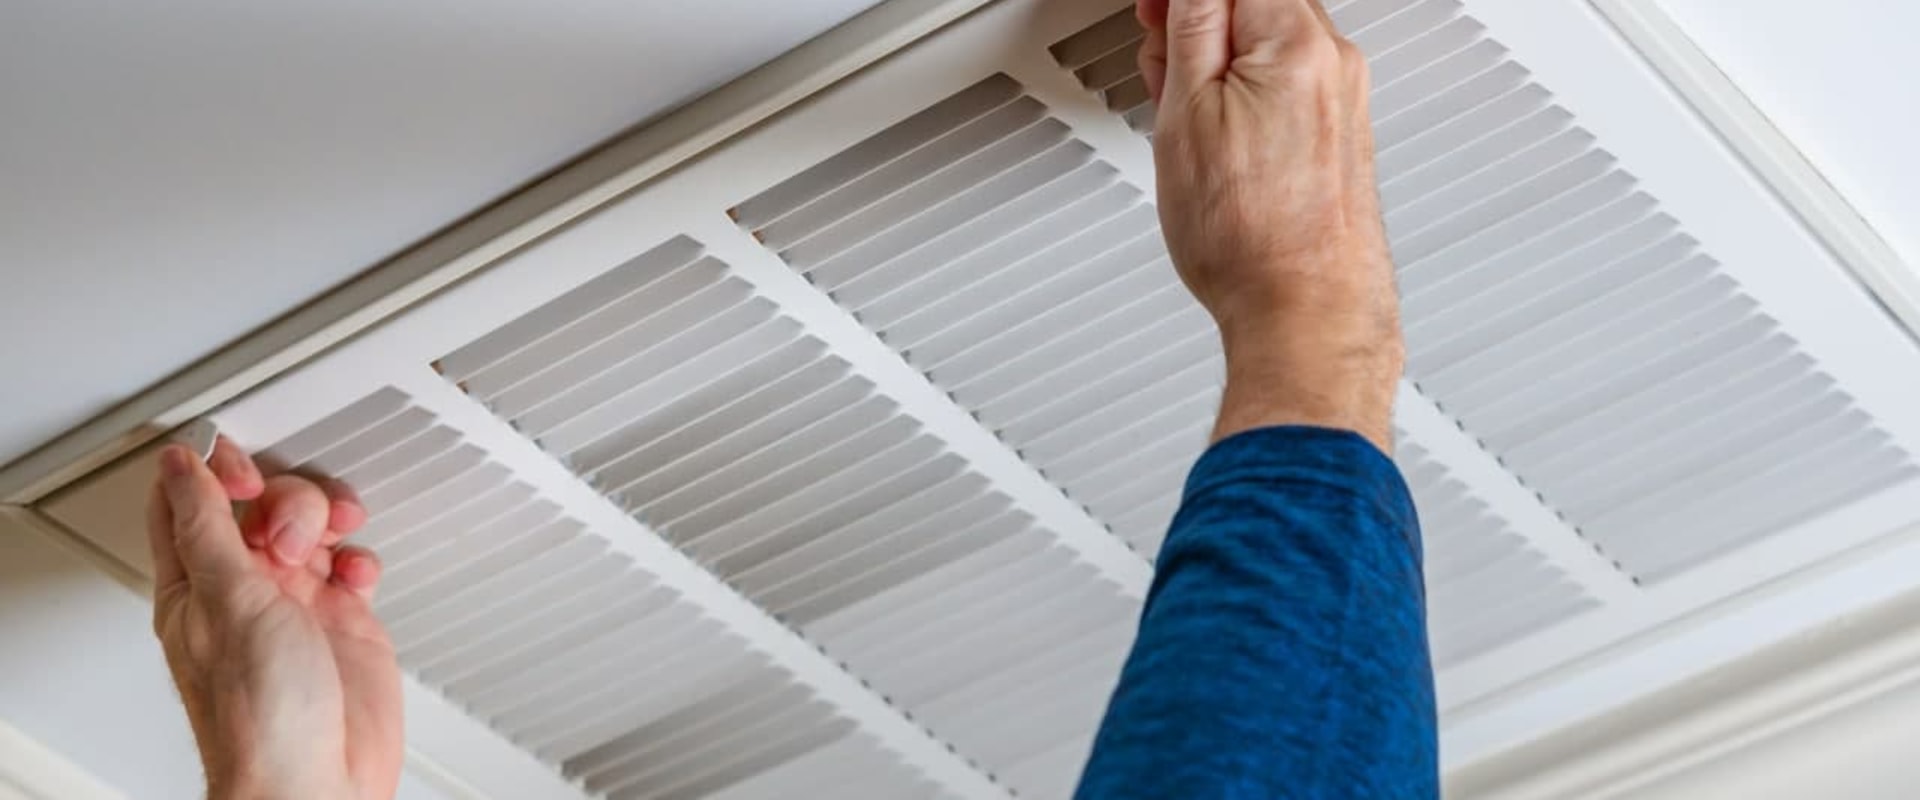 Can I Use a Slightly Smaller Air Filter? - The Expert Guide